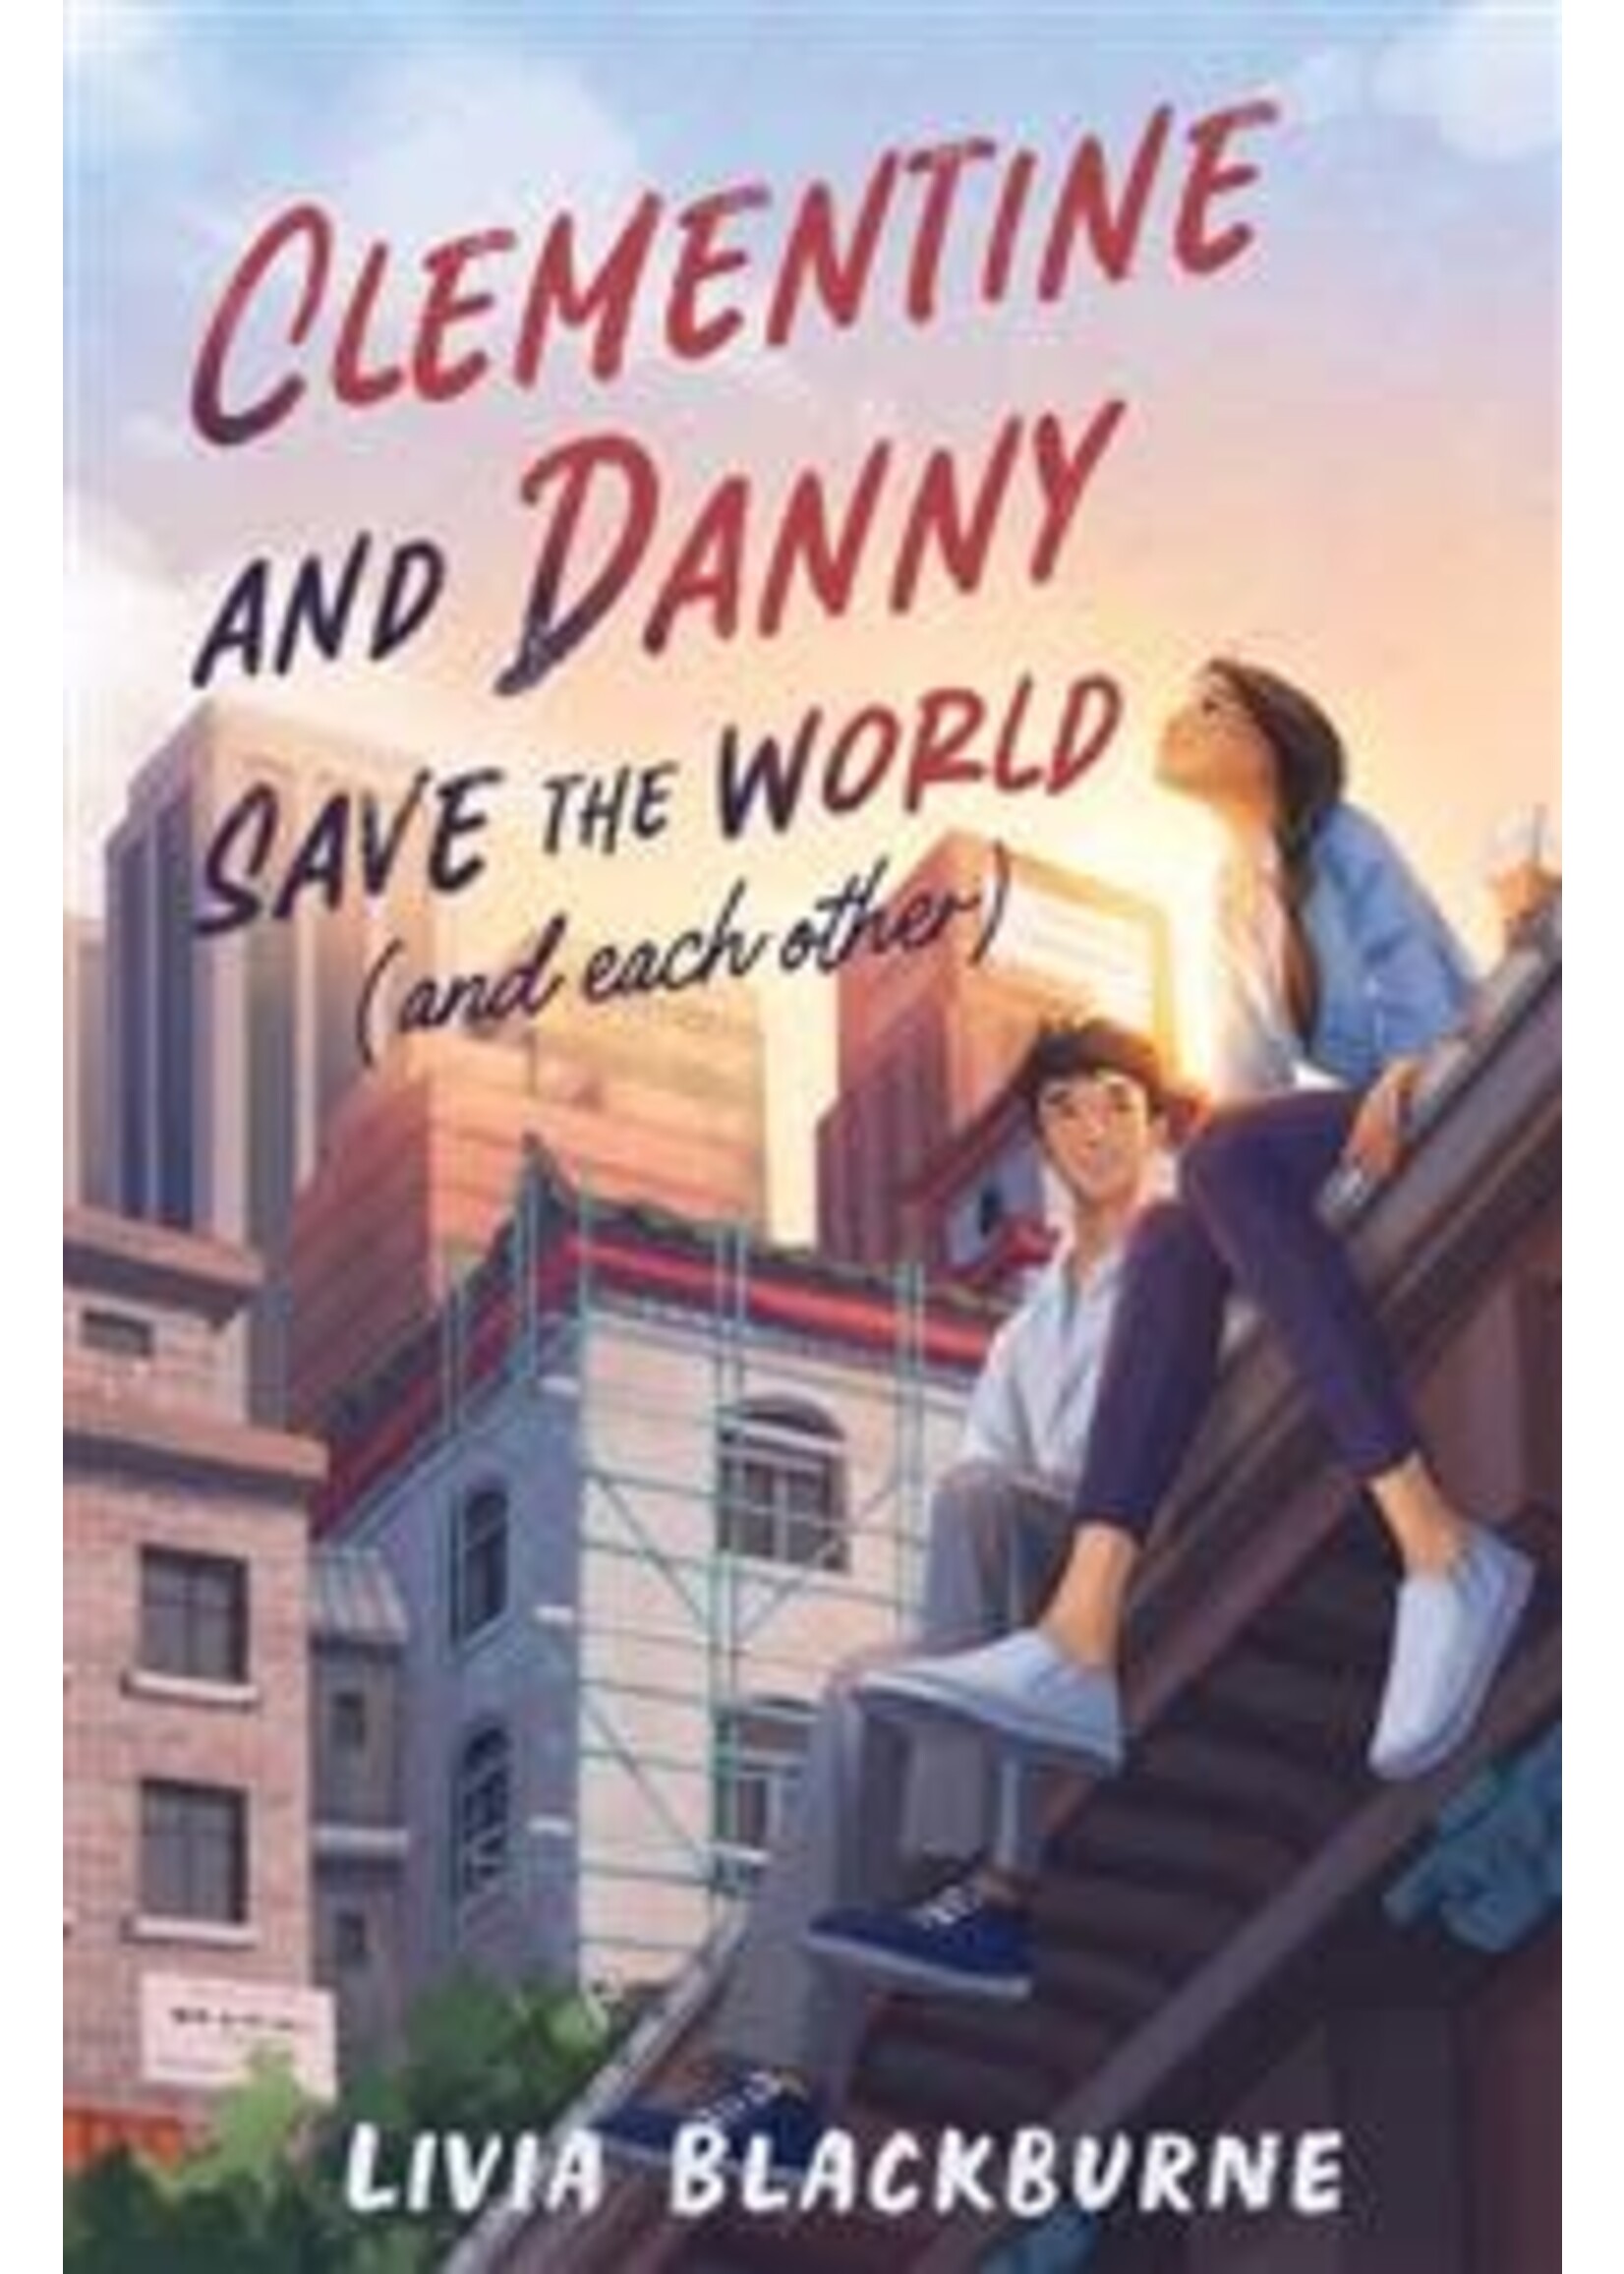 Clementine and Danny Save the World (and Each Other) by Livia Blackburne